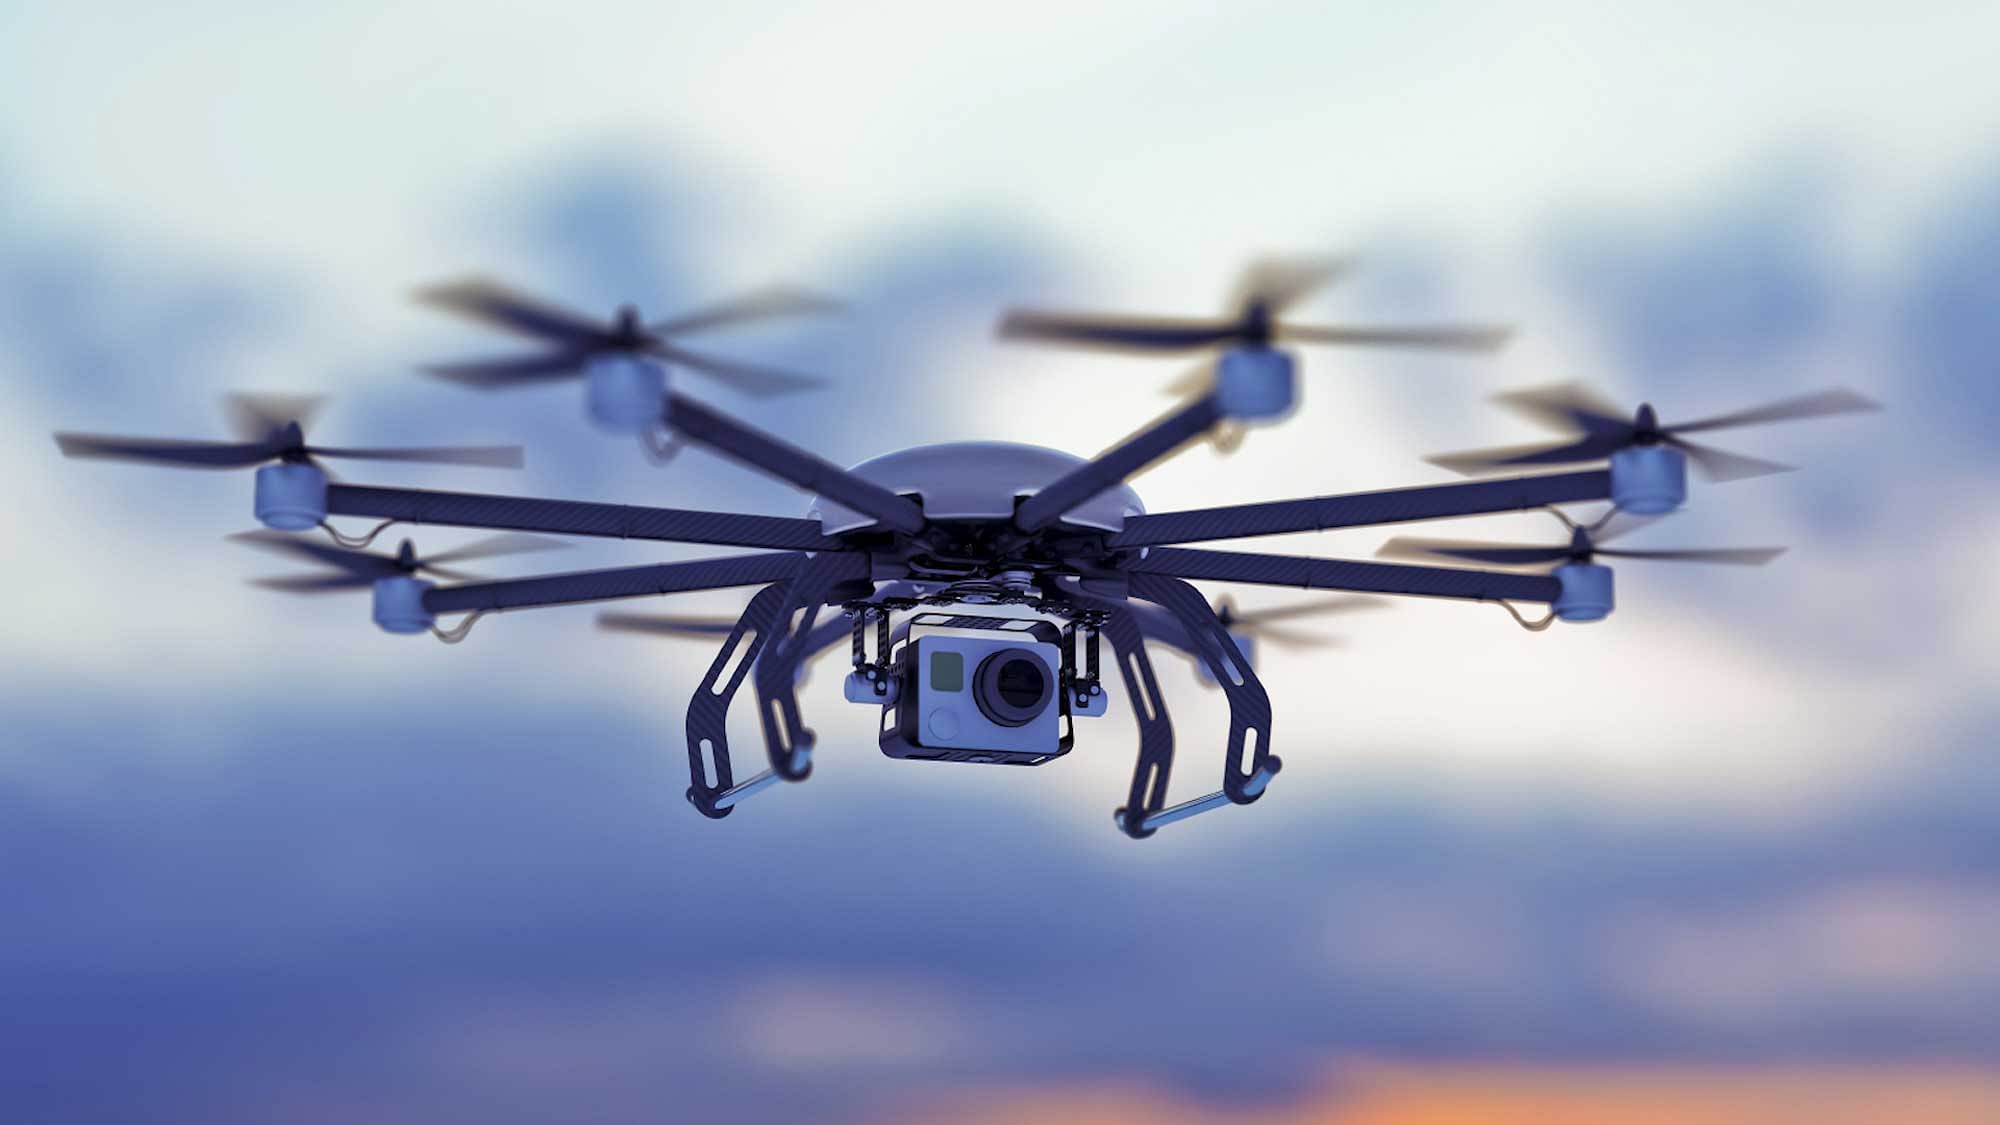 The Unmanned Aerial System (UAS), commonly known as drones, would require unique identification numbers.